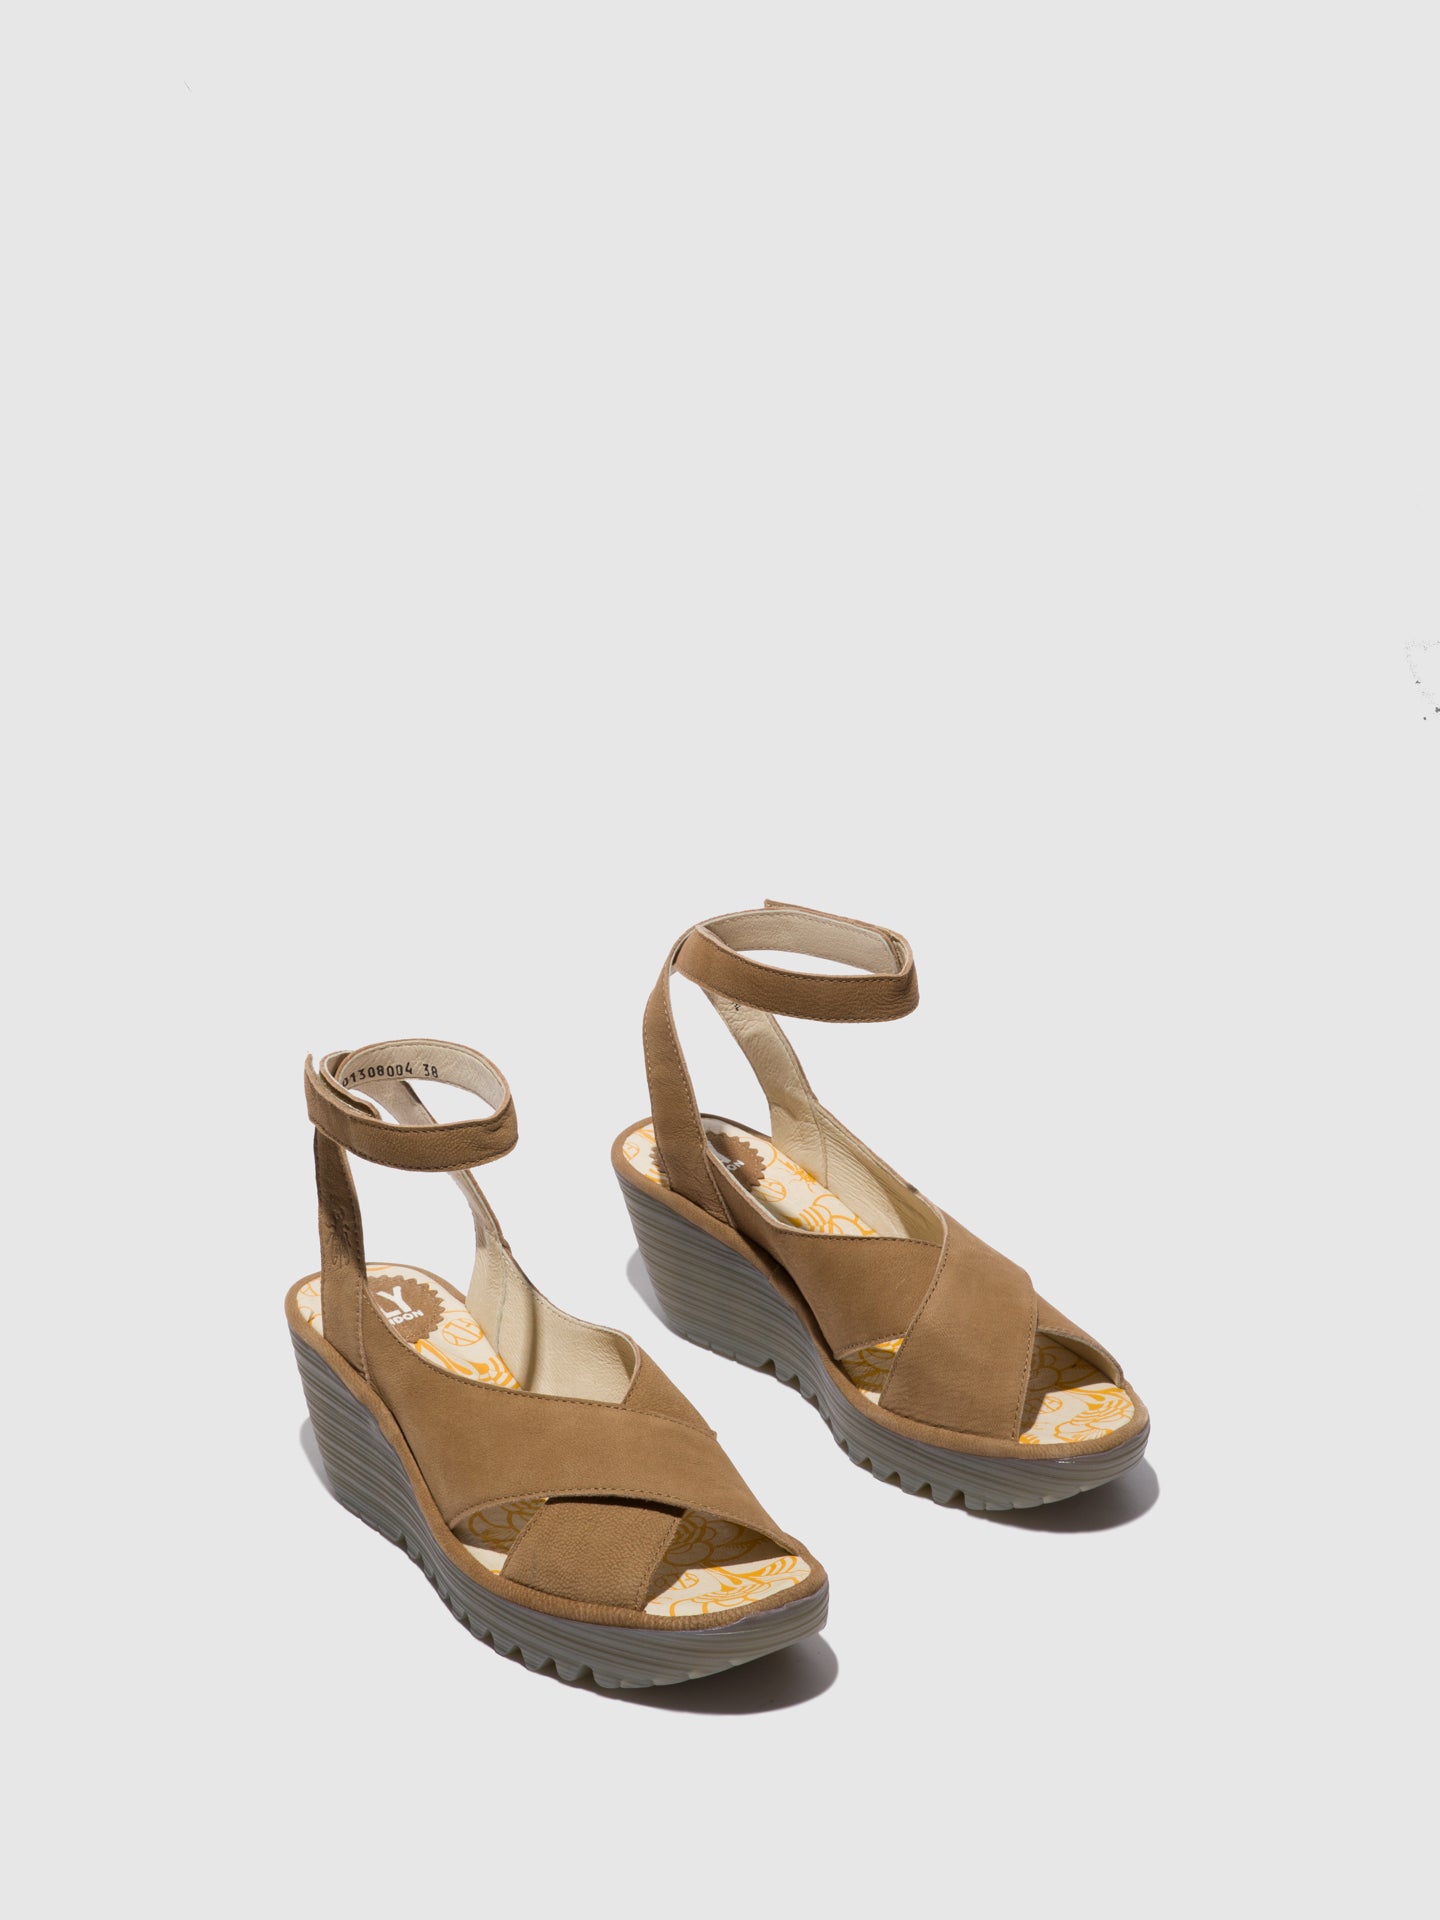 Fly London - Ankle Strap Sandals YIVI308FLY CUPIDO SAND - Overcube